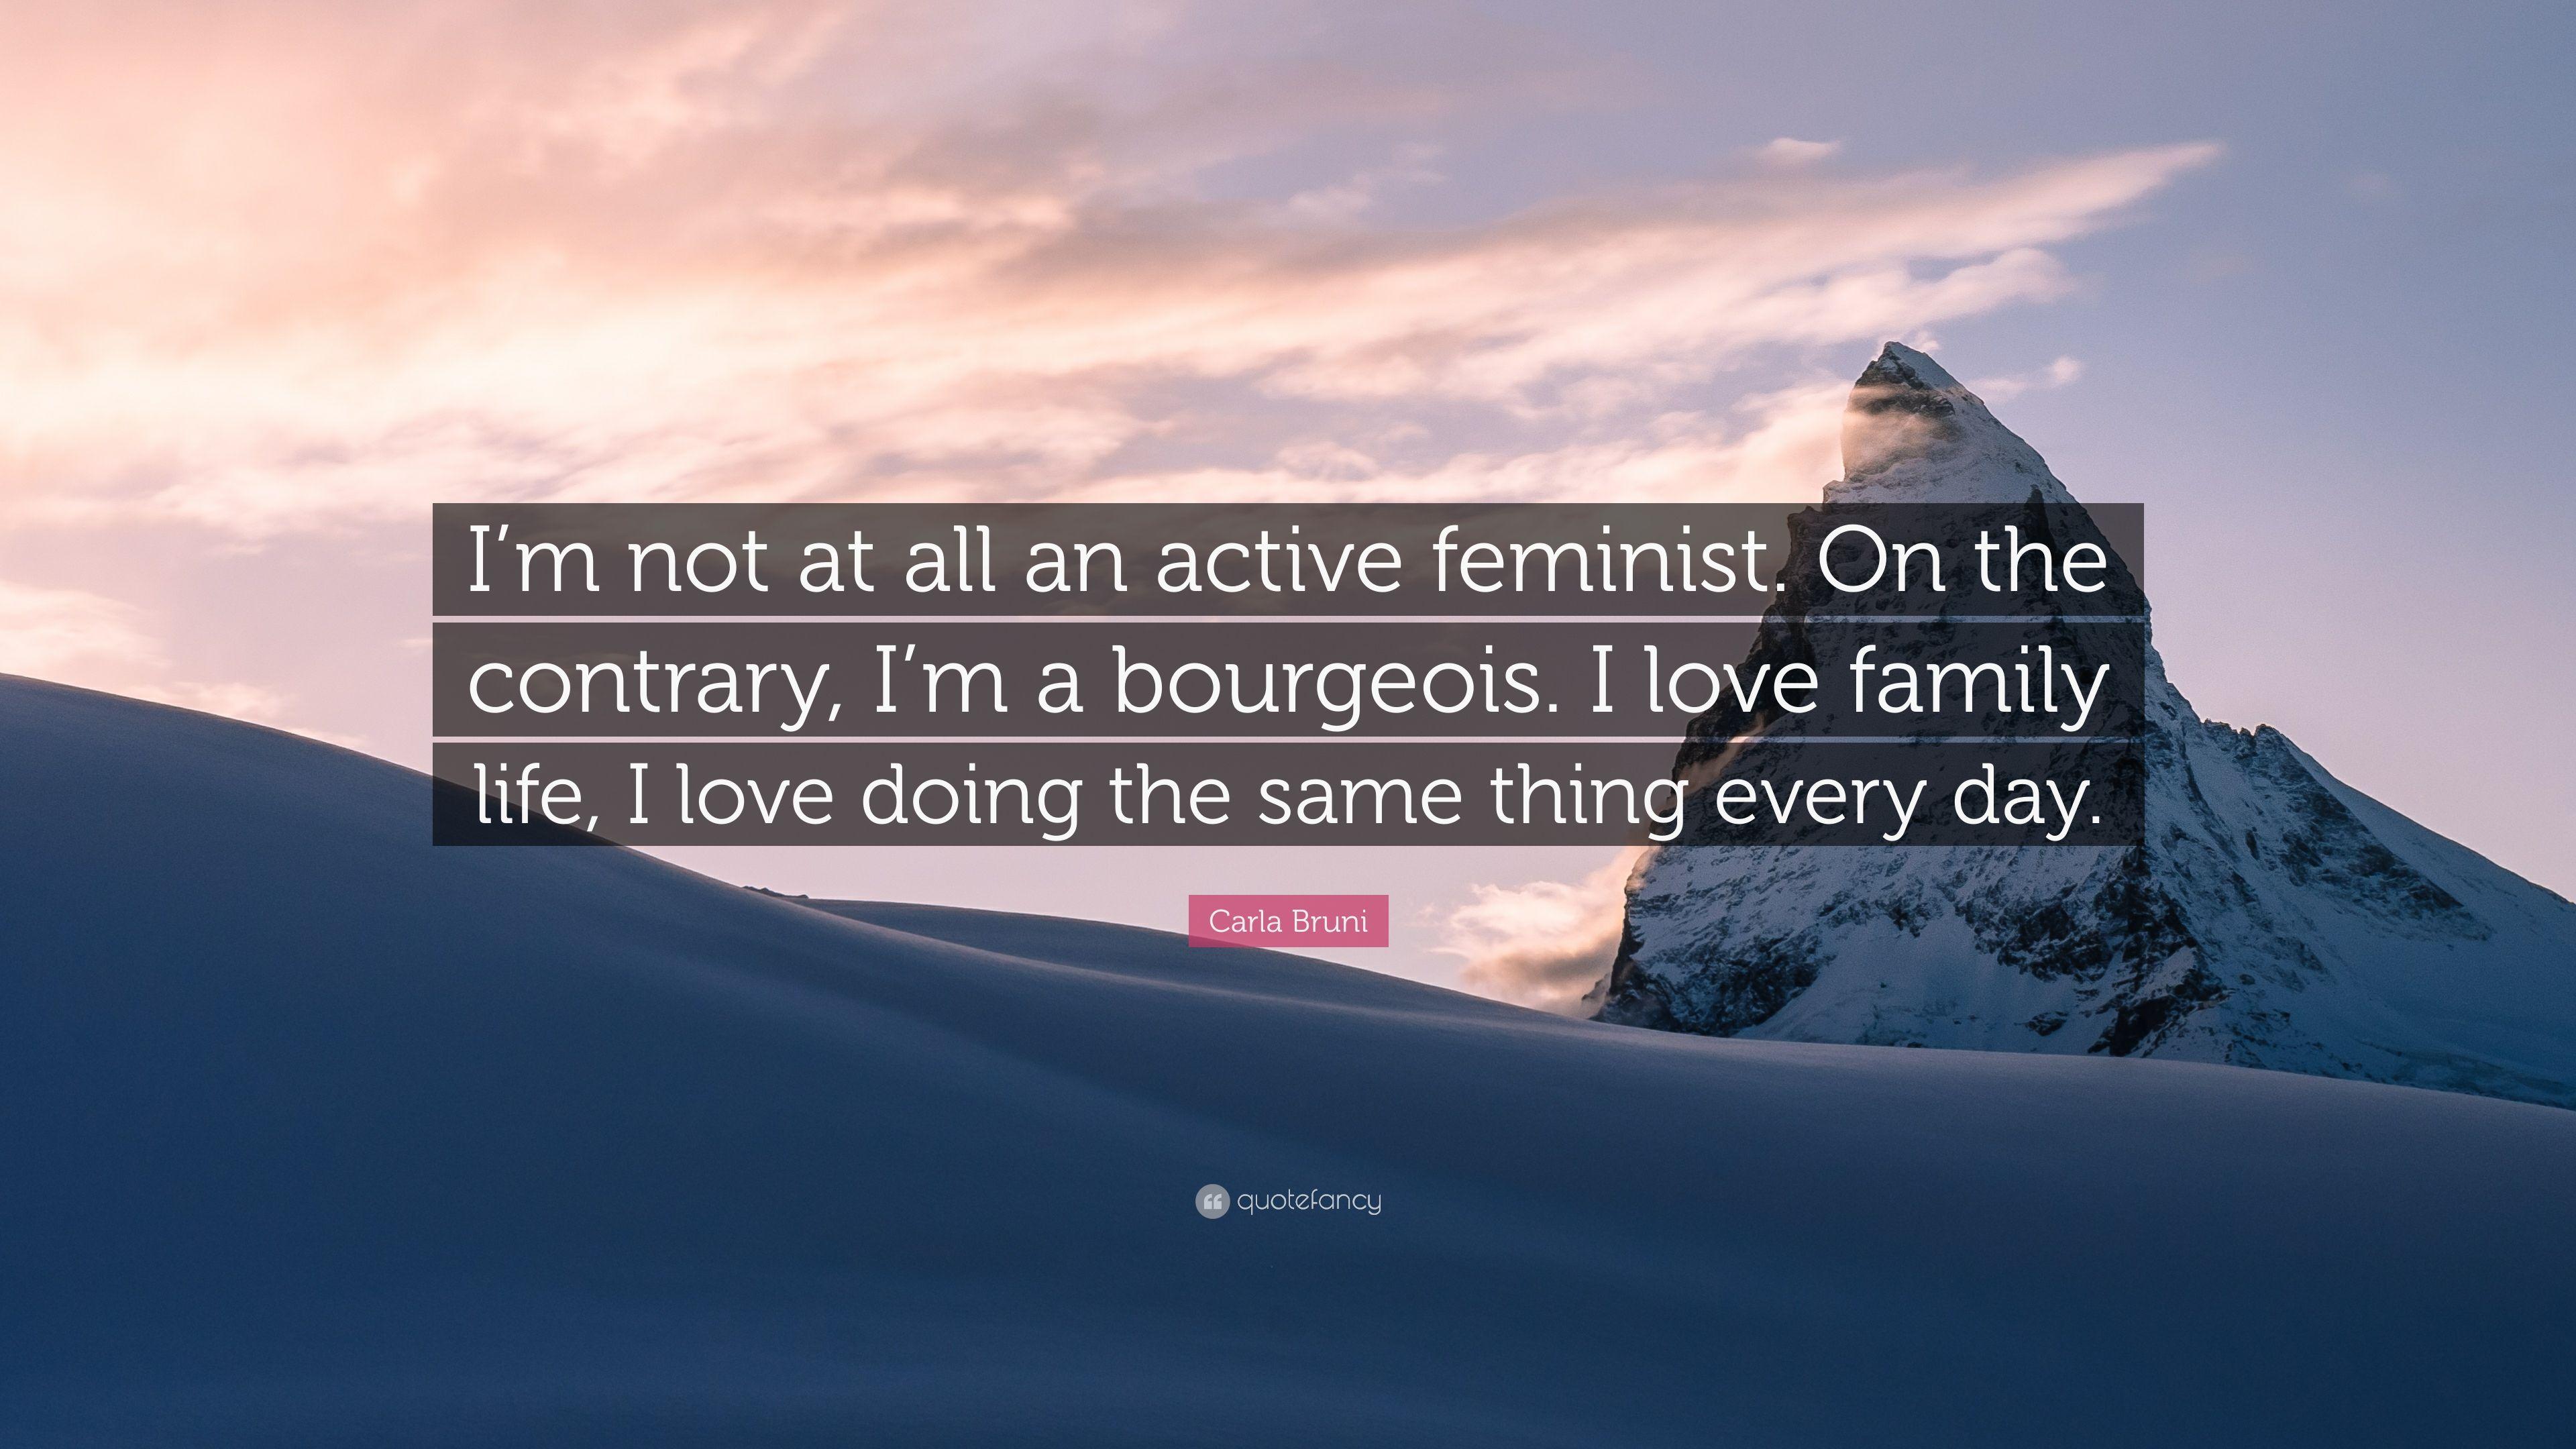 Carla Bruni Quote: “I'm not at all an active feminist. On